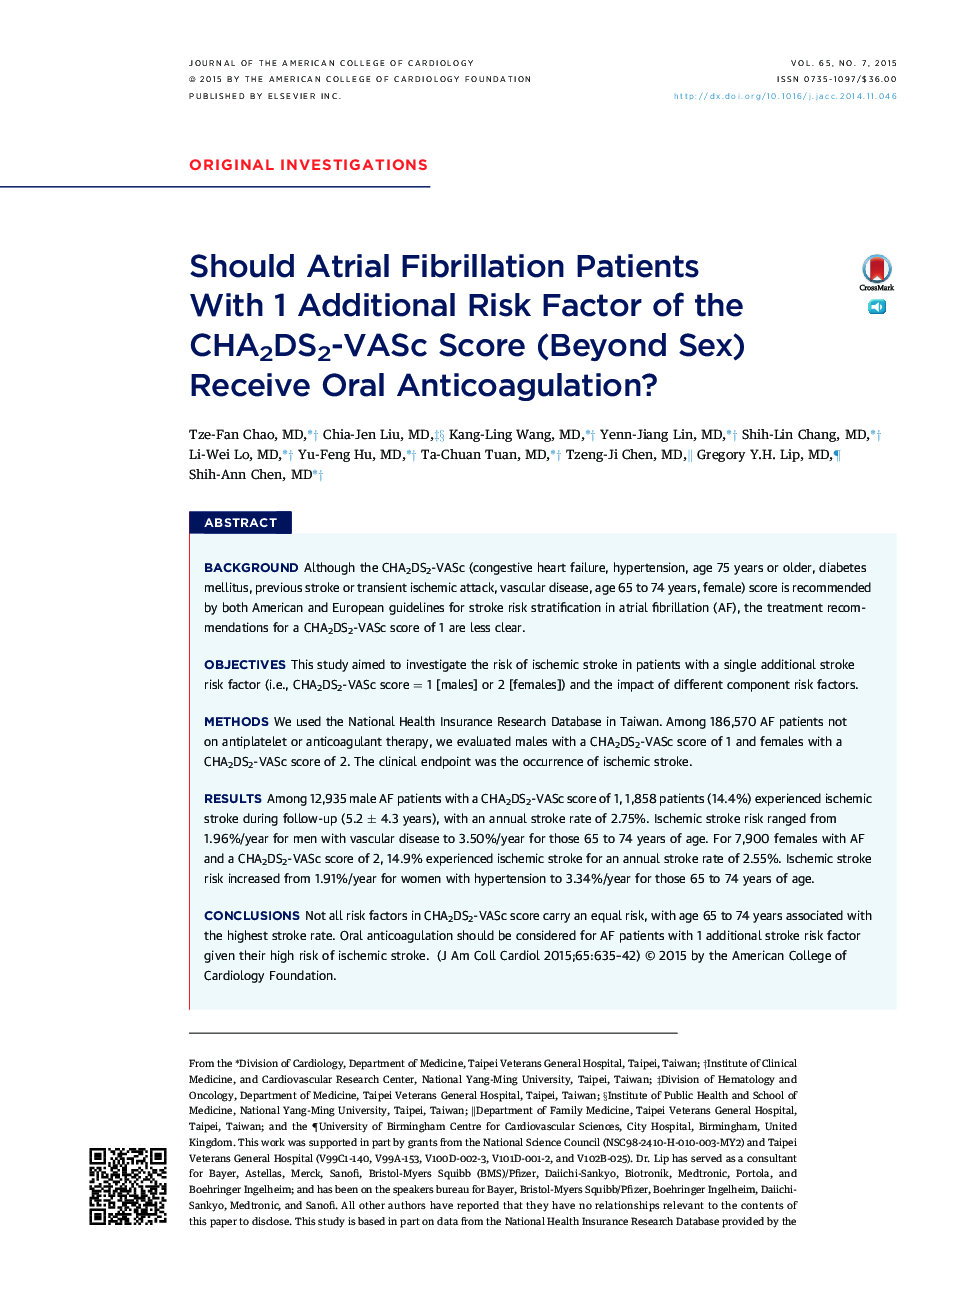 Should Atrial Fibrillation Patients With 1 Additional Risk Factor of the CHA2DS2-VASc Score (Beyond Sex) Receive Oral Anticoagulation? 